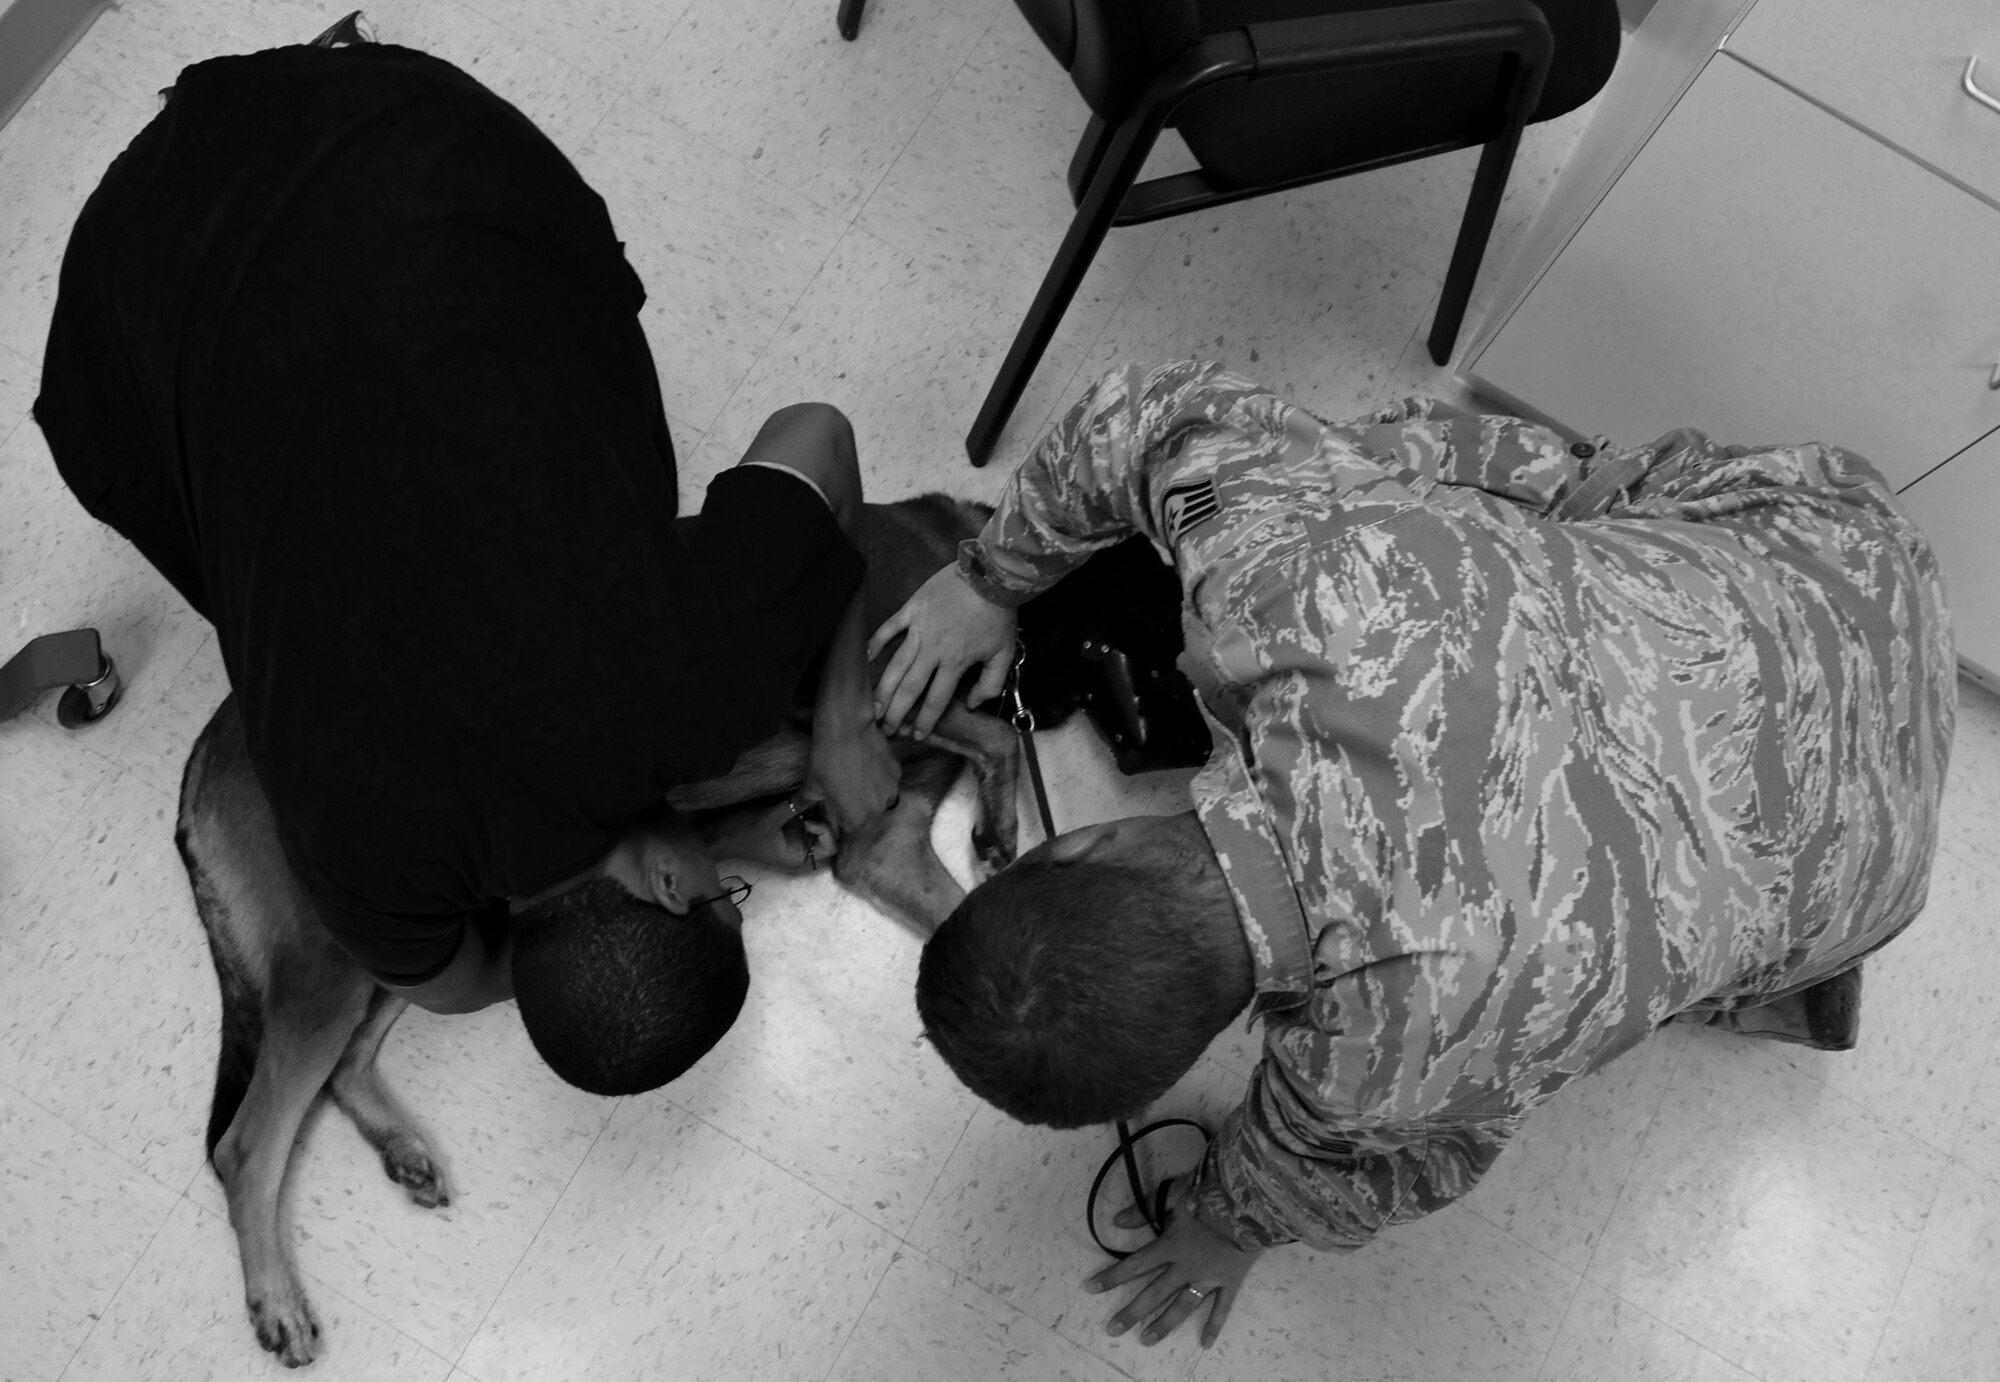 ANDERSEN AIR FORCE BASE, Guam—U.S. Air Force Staff Sgt. David McClain, 36th Security Forces Squadron military working dog trainer, keeps Carlos, a MWD assigned to the 36th SFS, calm as U.S. Army Spec. Jared Donnell, Public Health Command District Western Pacific veterinarian’s technician, removes sutures during a visit to the clinic here Aug. 17. Carlos had to have sutures removed from healed injuries during his revisit to the clinic. (U.S. Air Force photo by Senior Airman Benjamin Wiseman/Released)